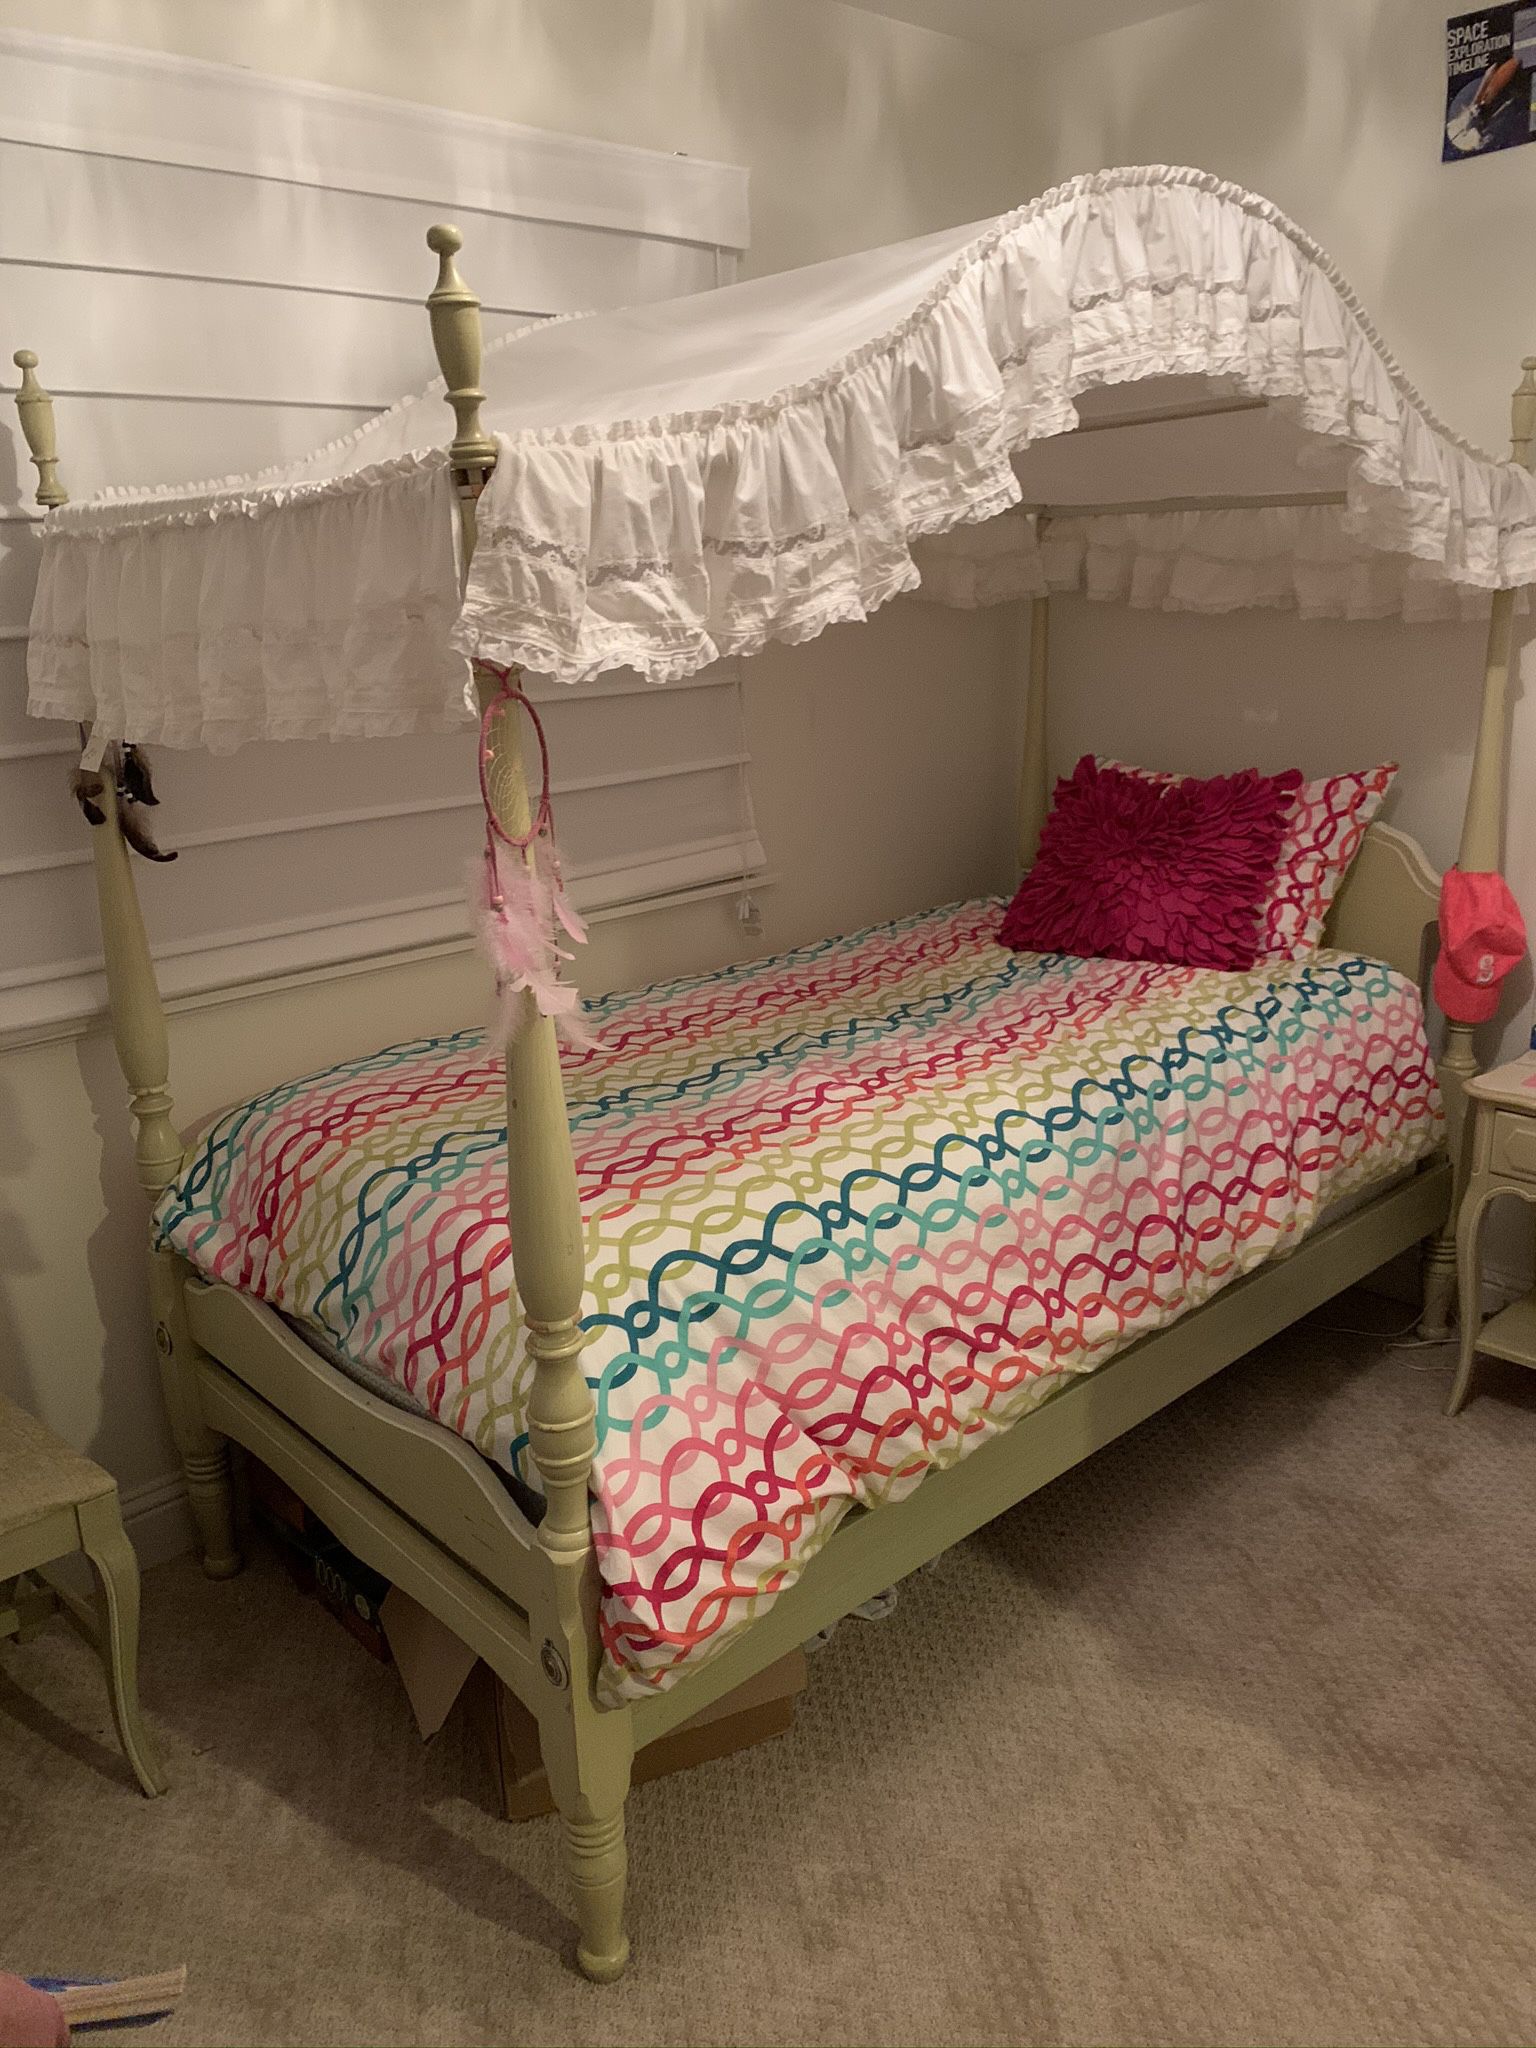 Vintage Twin Canopy Bed For In, Antique Twin Canopy Bed